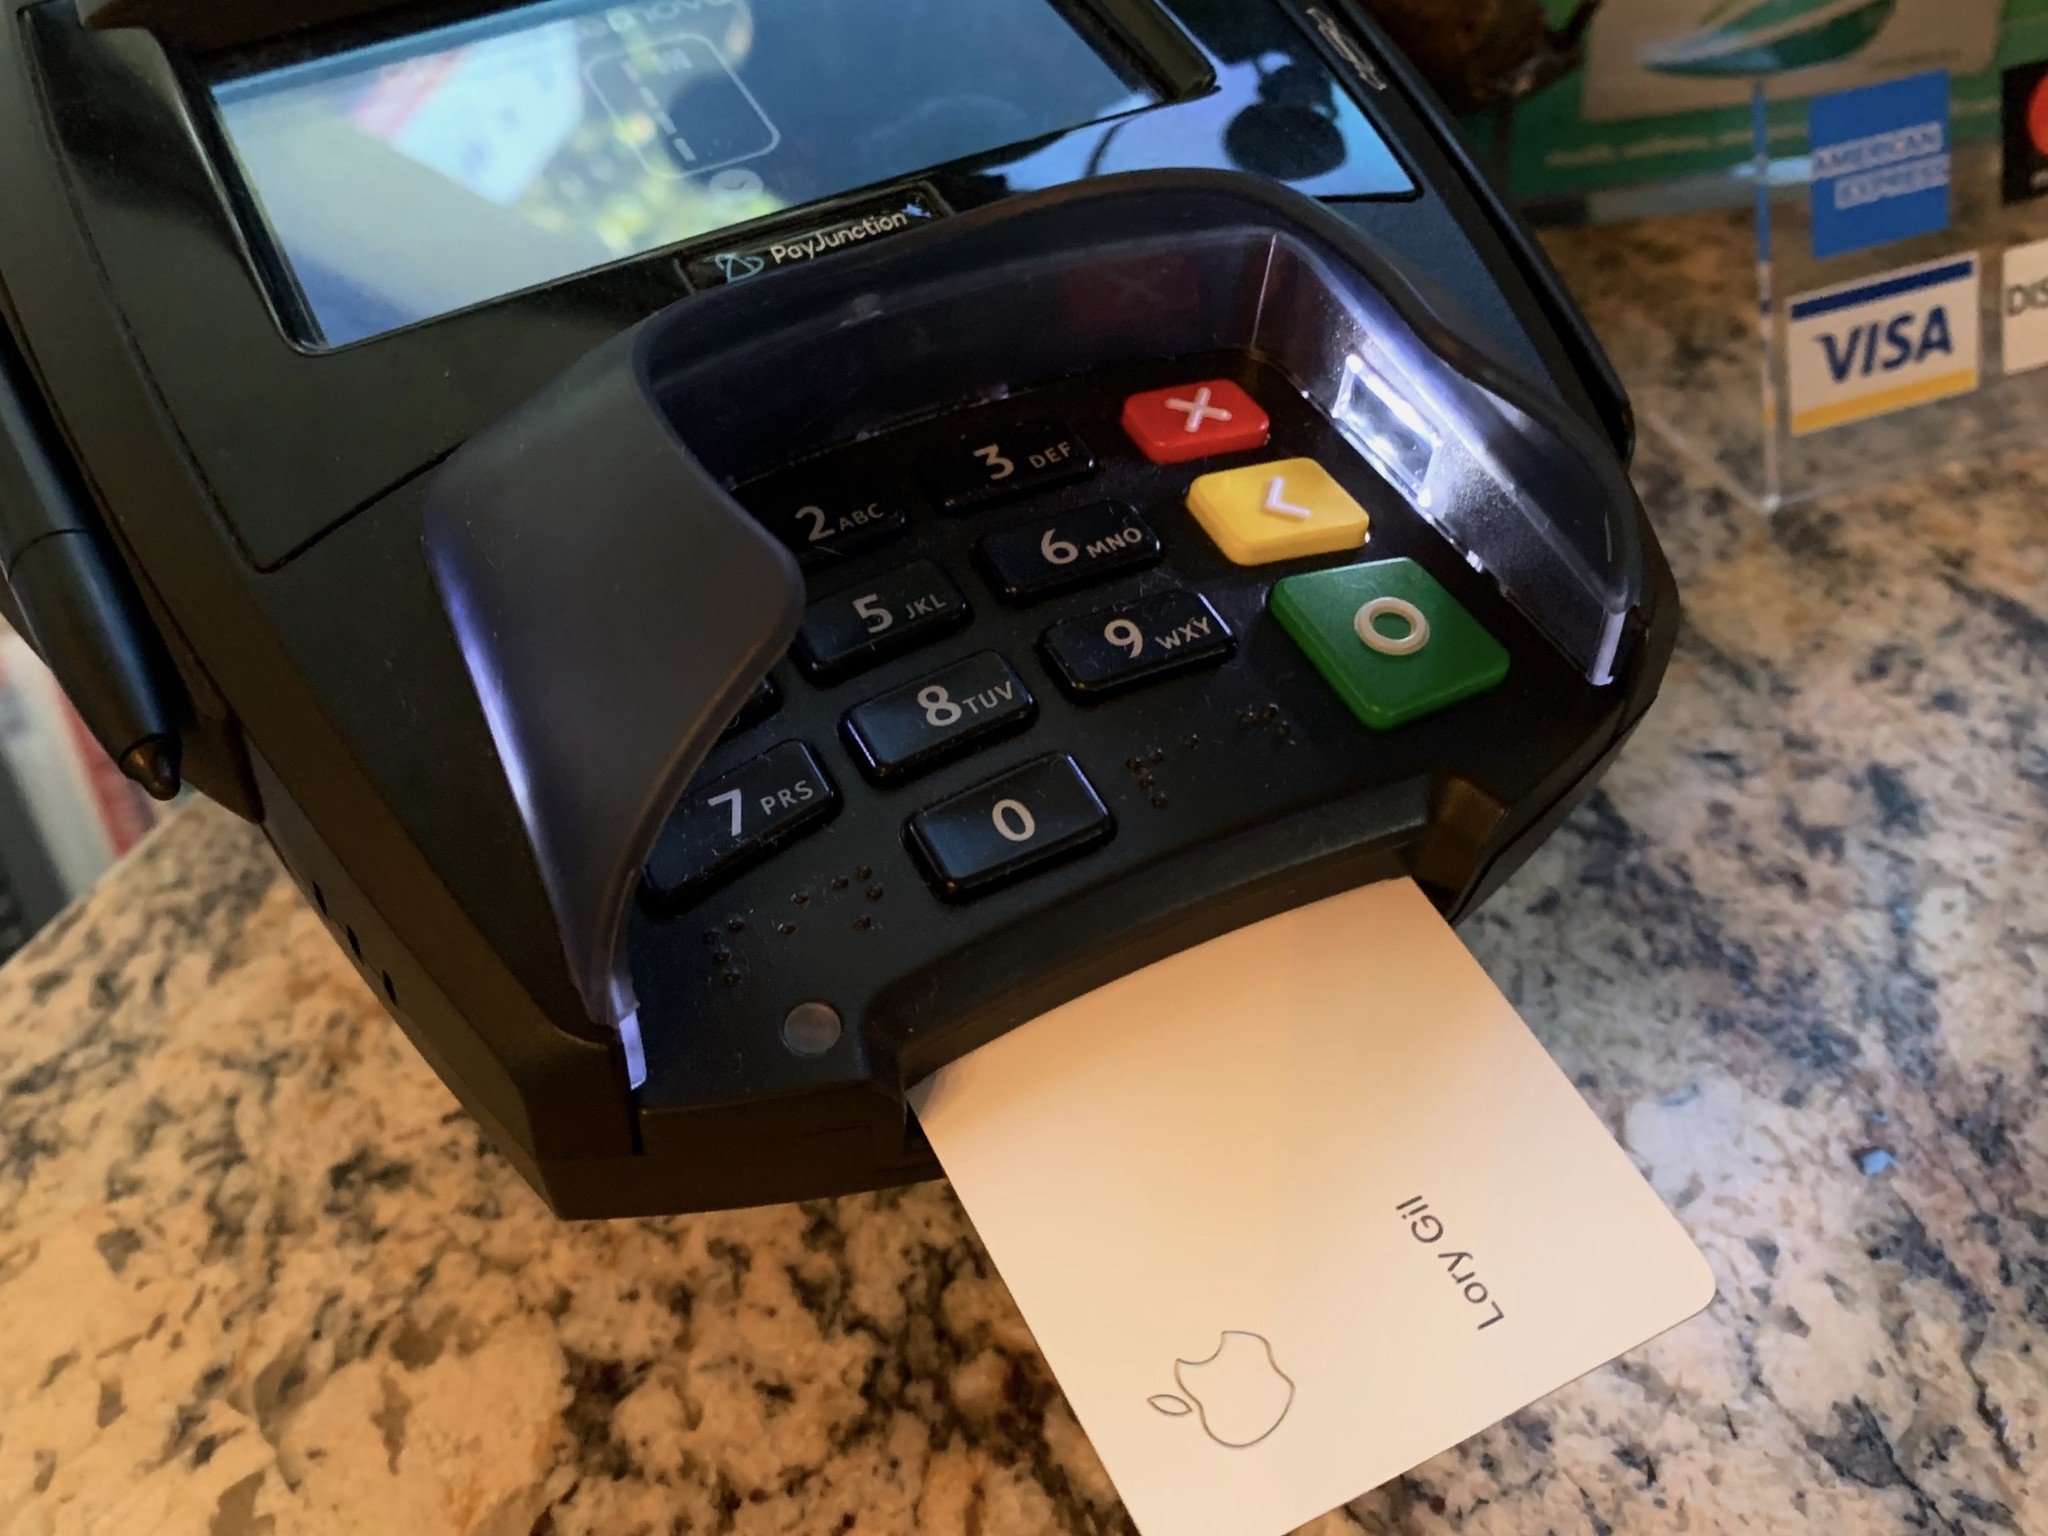 Use the titanium Apple Card to make purchases at places without Apple Pay